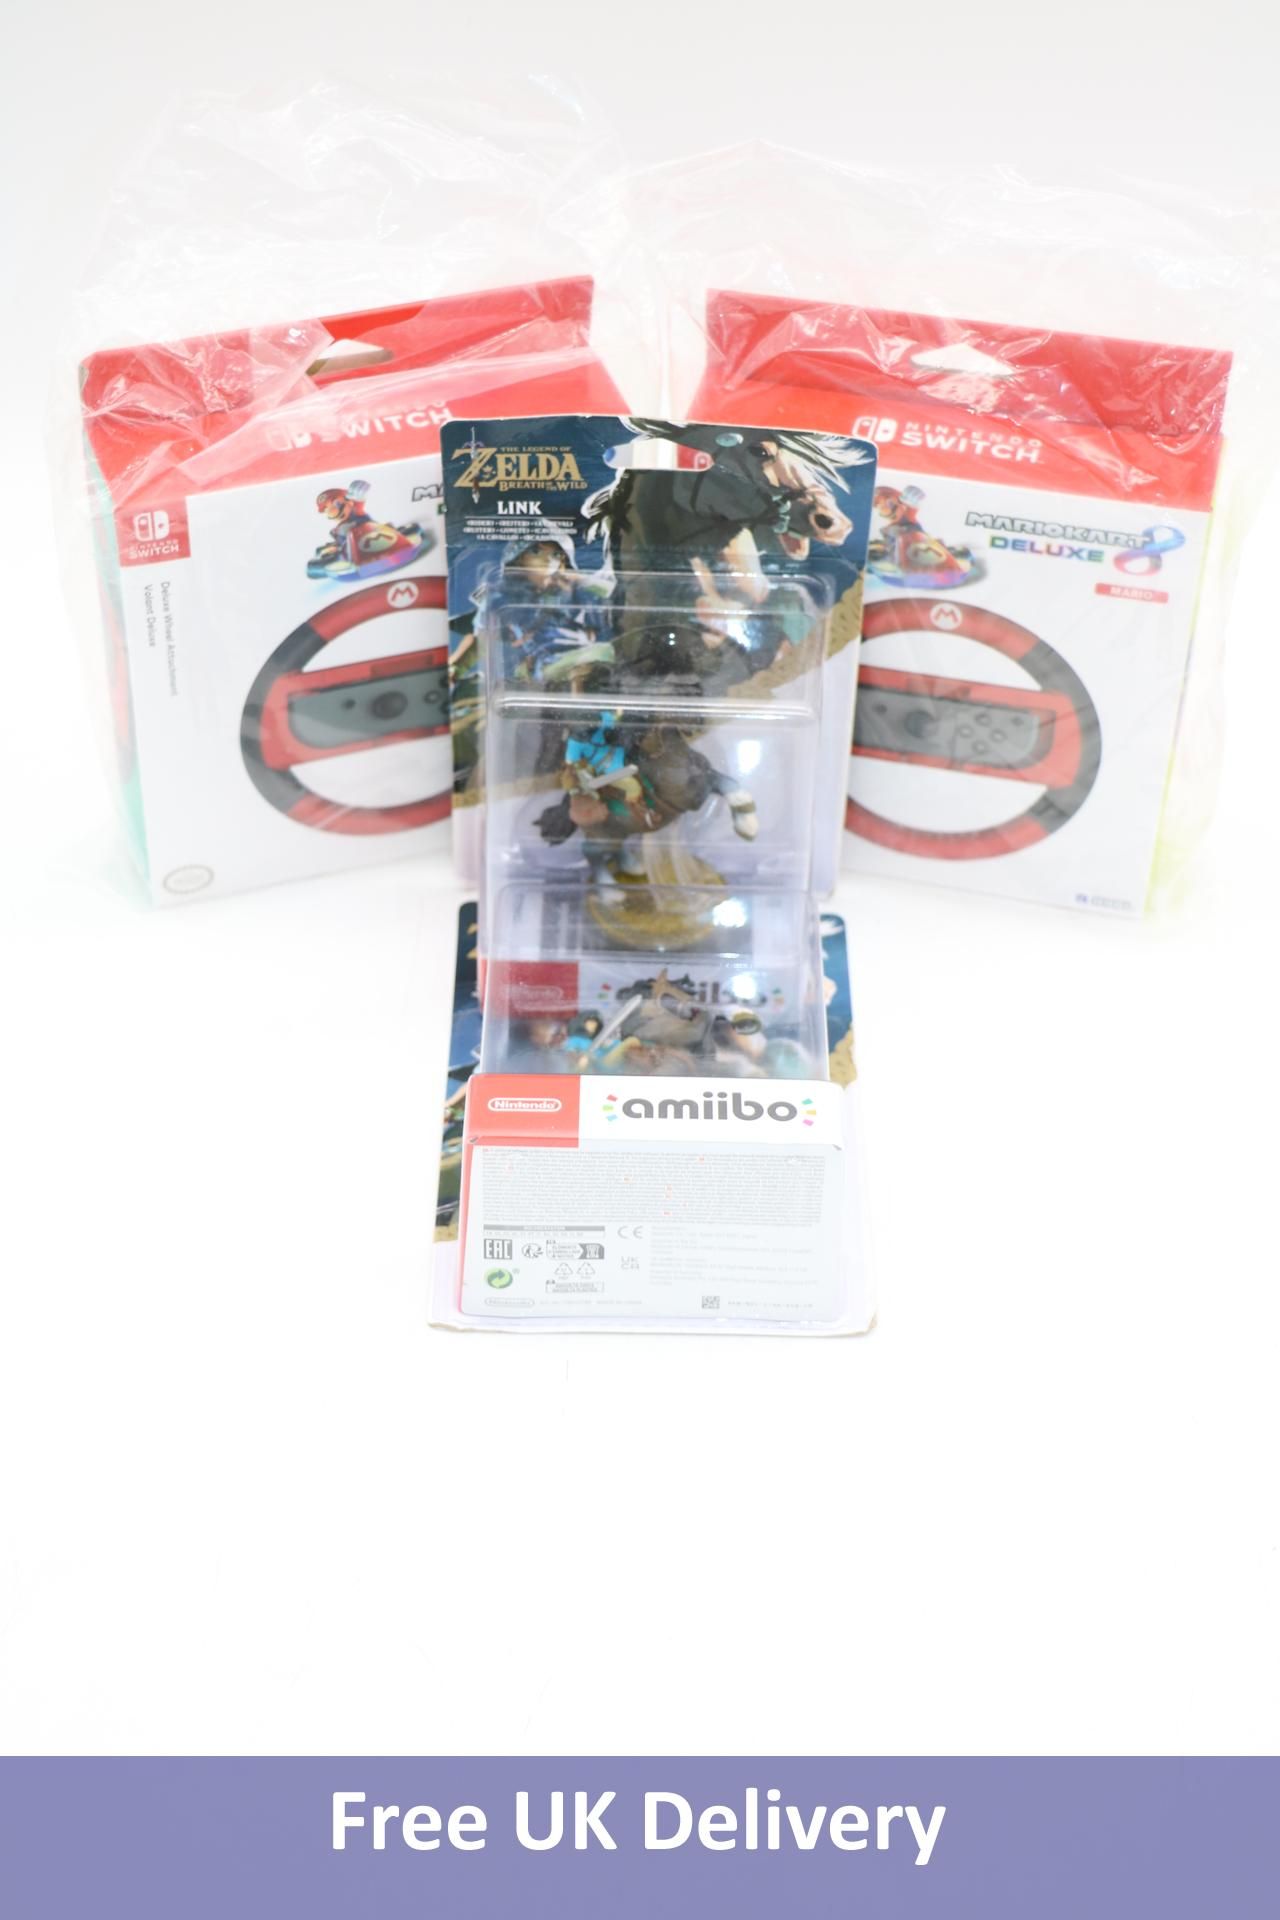 Four Nintendo items to include 2x Mario Cart Deluxe Wheel Attachment for Switch, 2x Amiibo Breath of